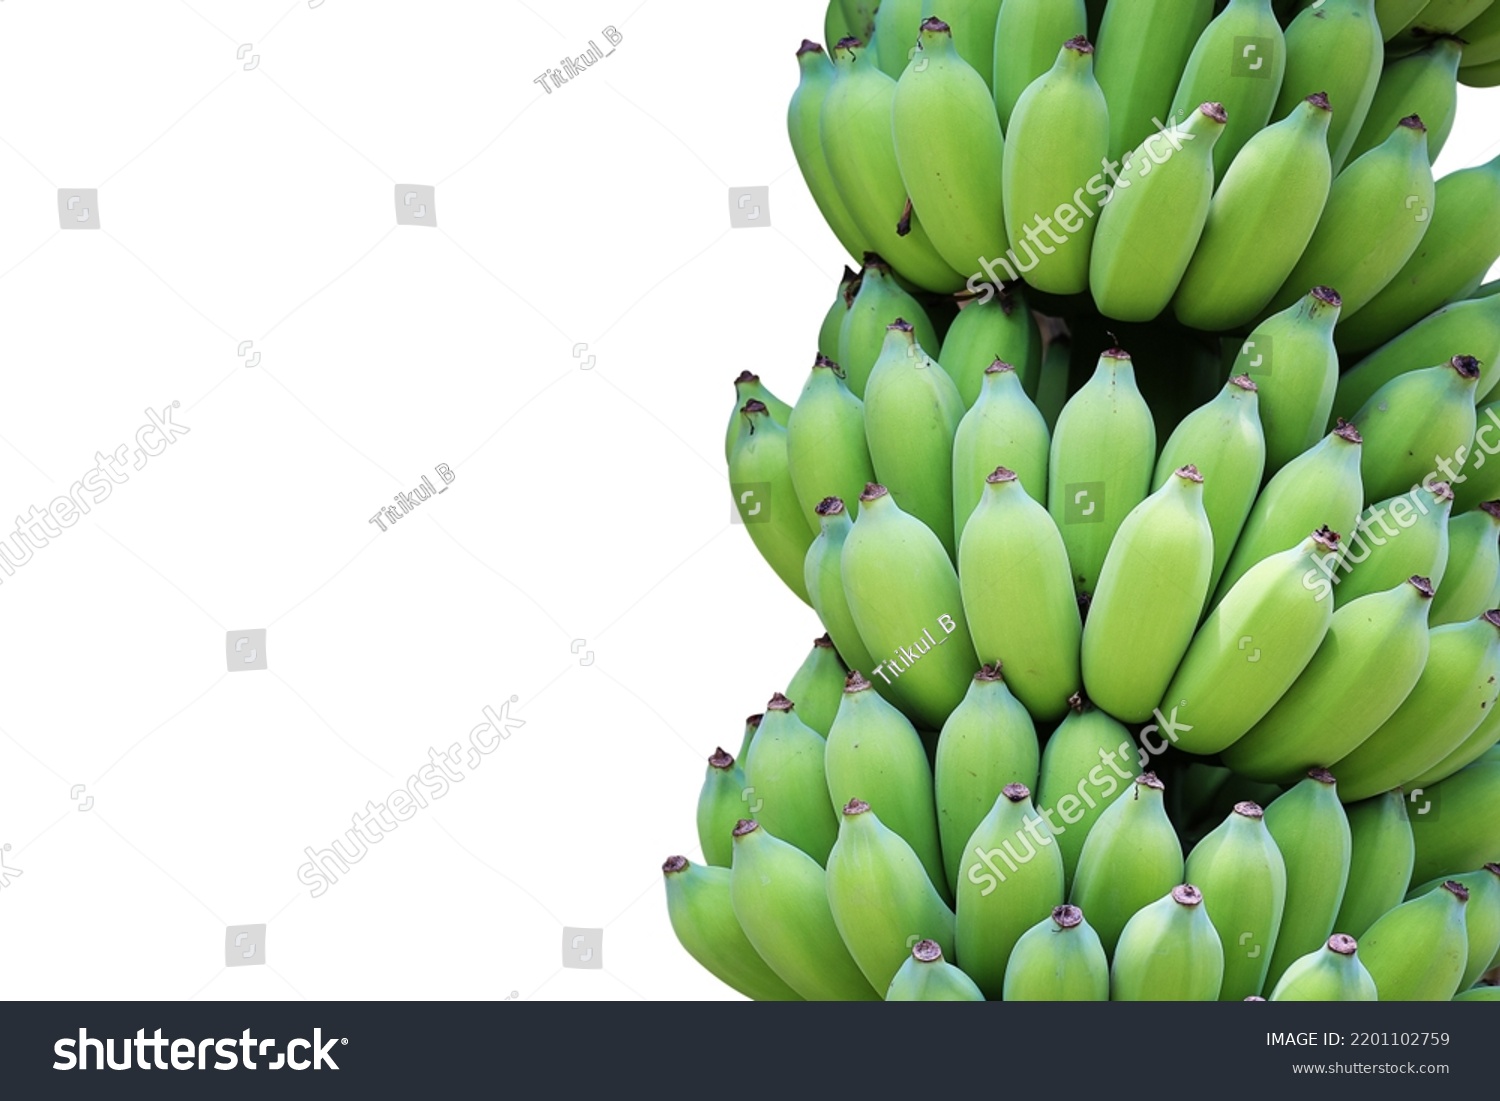 Bunch of cultivated bananas or organic bananas plantation isolated on white background with clipping path. #2201102759